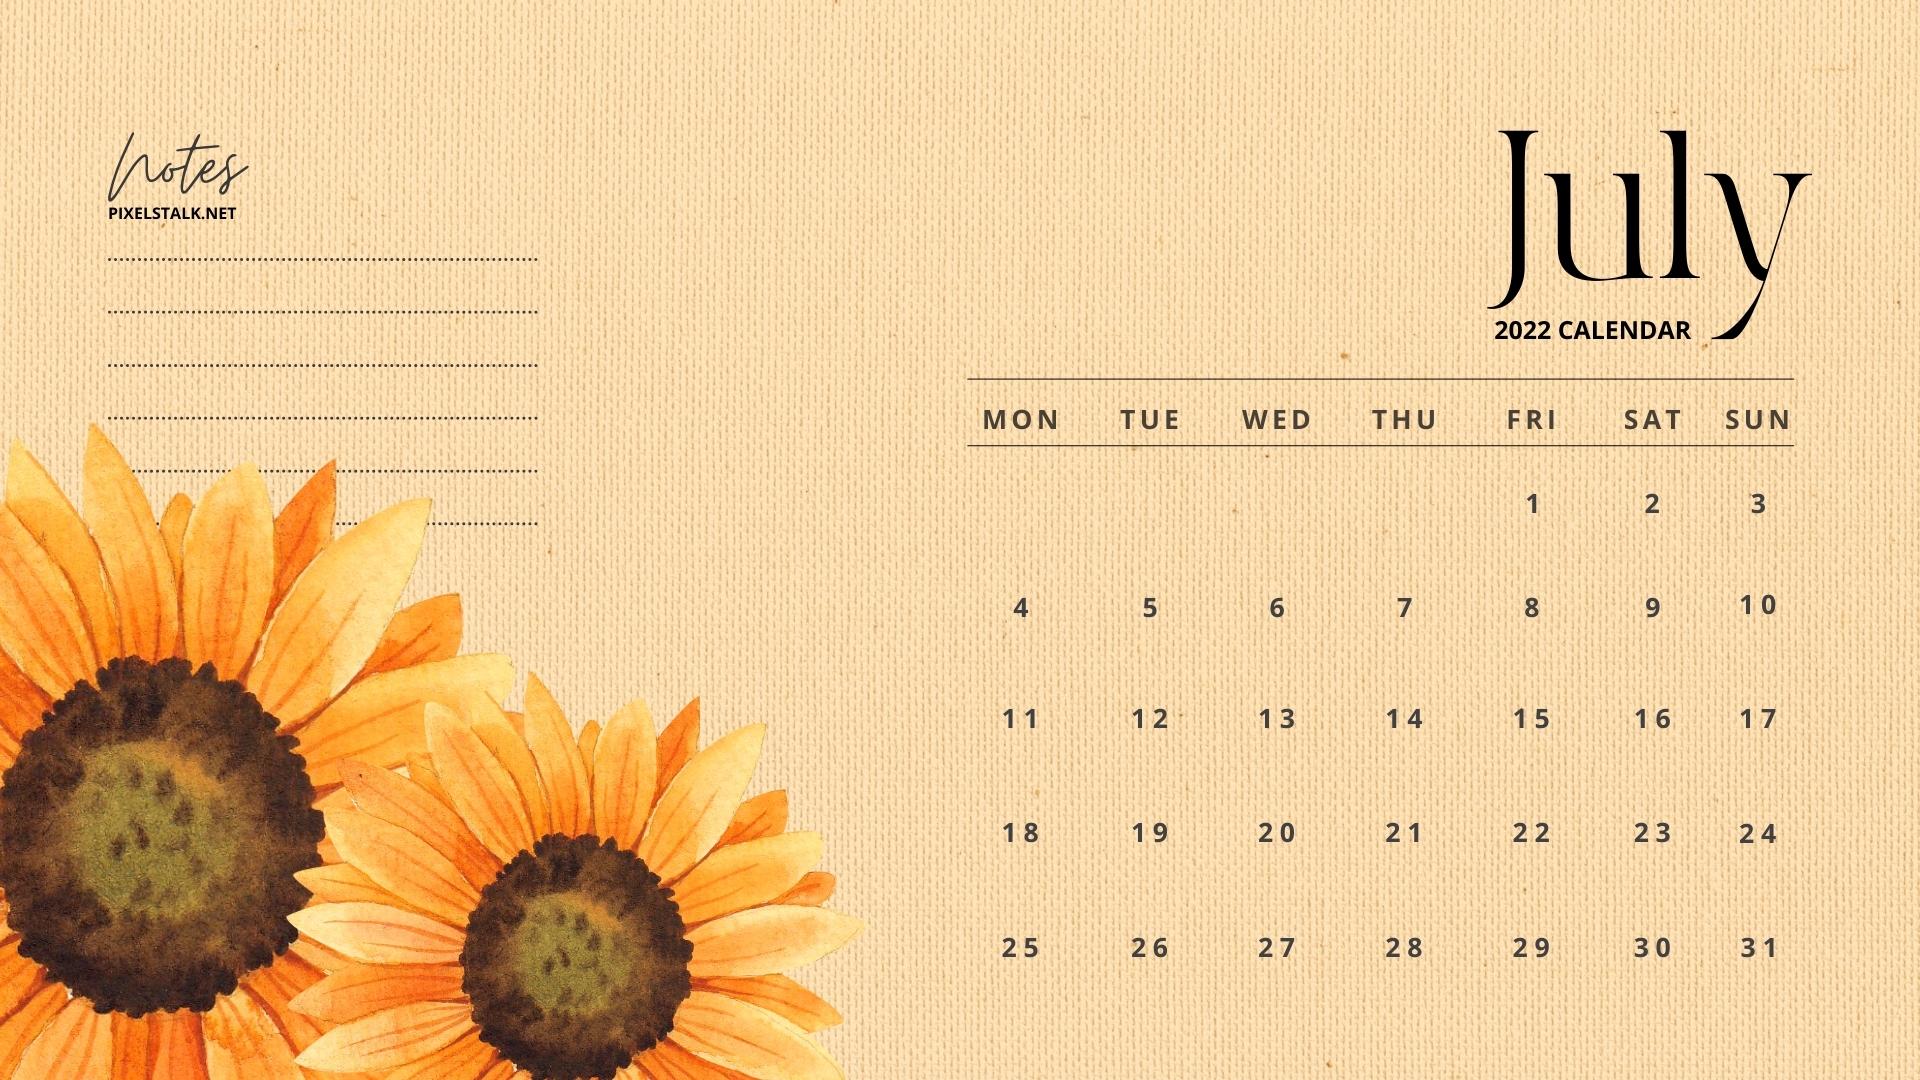 July 2022 Calendar Wallpaper Images  Free Photos PNG Stickers Wallpapers   Backgrounds  rawpixel